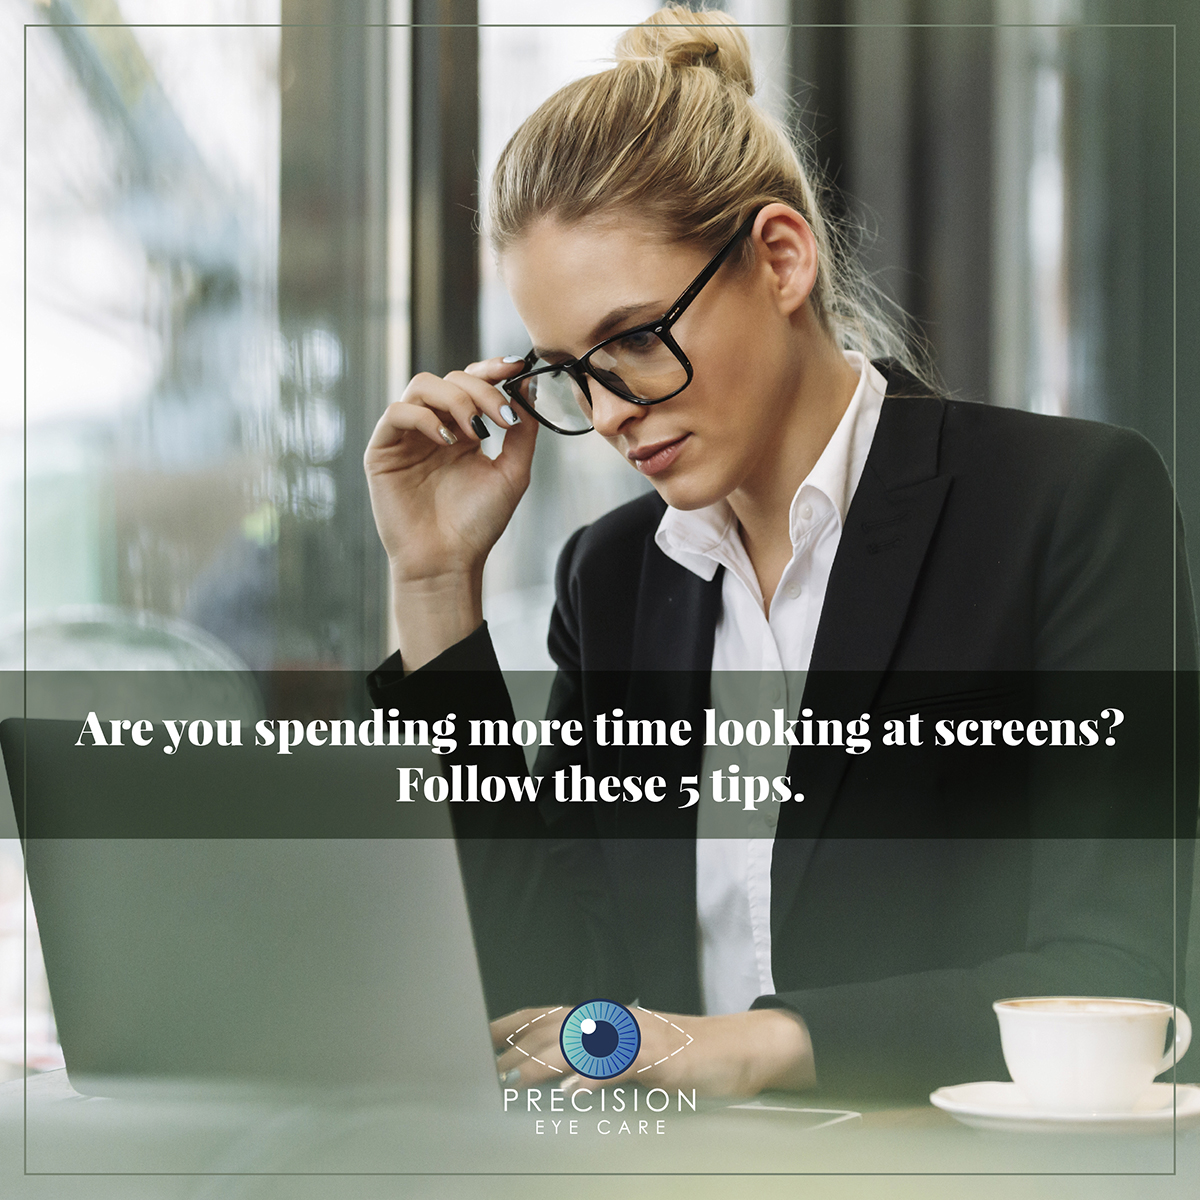 Are you spending more time looking at screens?